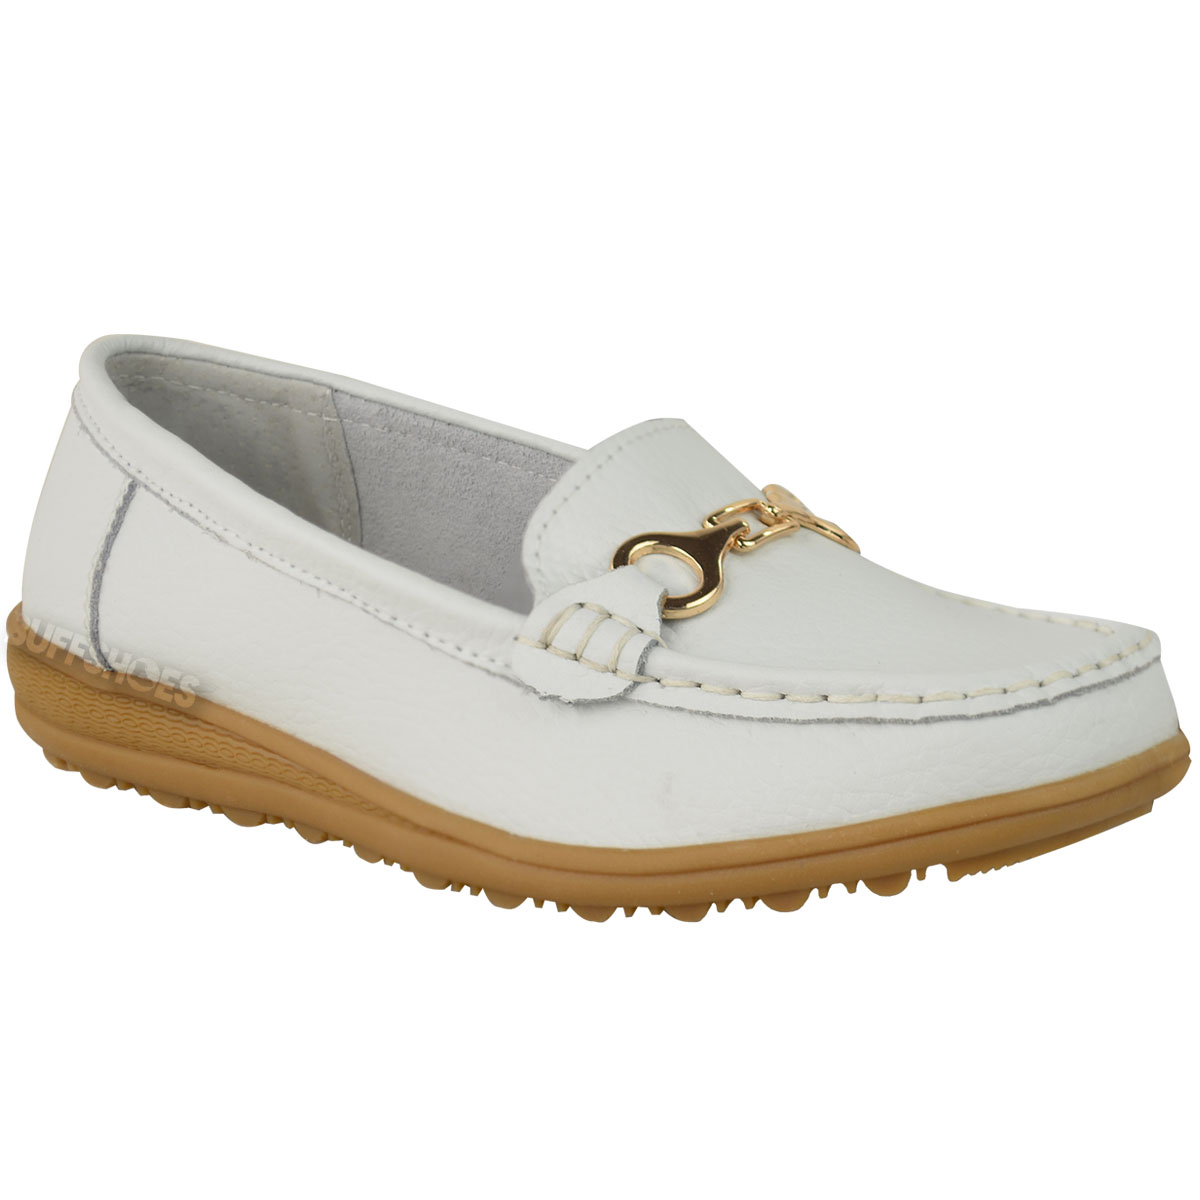 LADIES-WOMENS-LEATHER-WEDGE-SHOES-LOAFERS-SLIP-ON-COMFORT-WALKING-GRIP ...